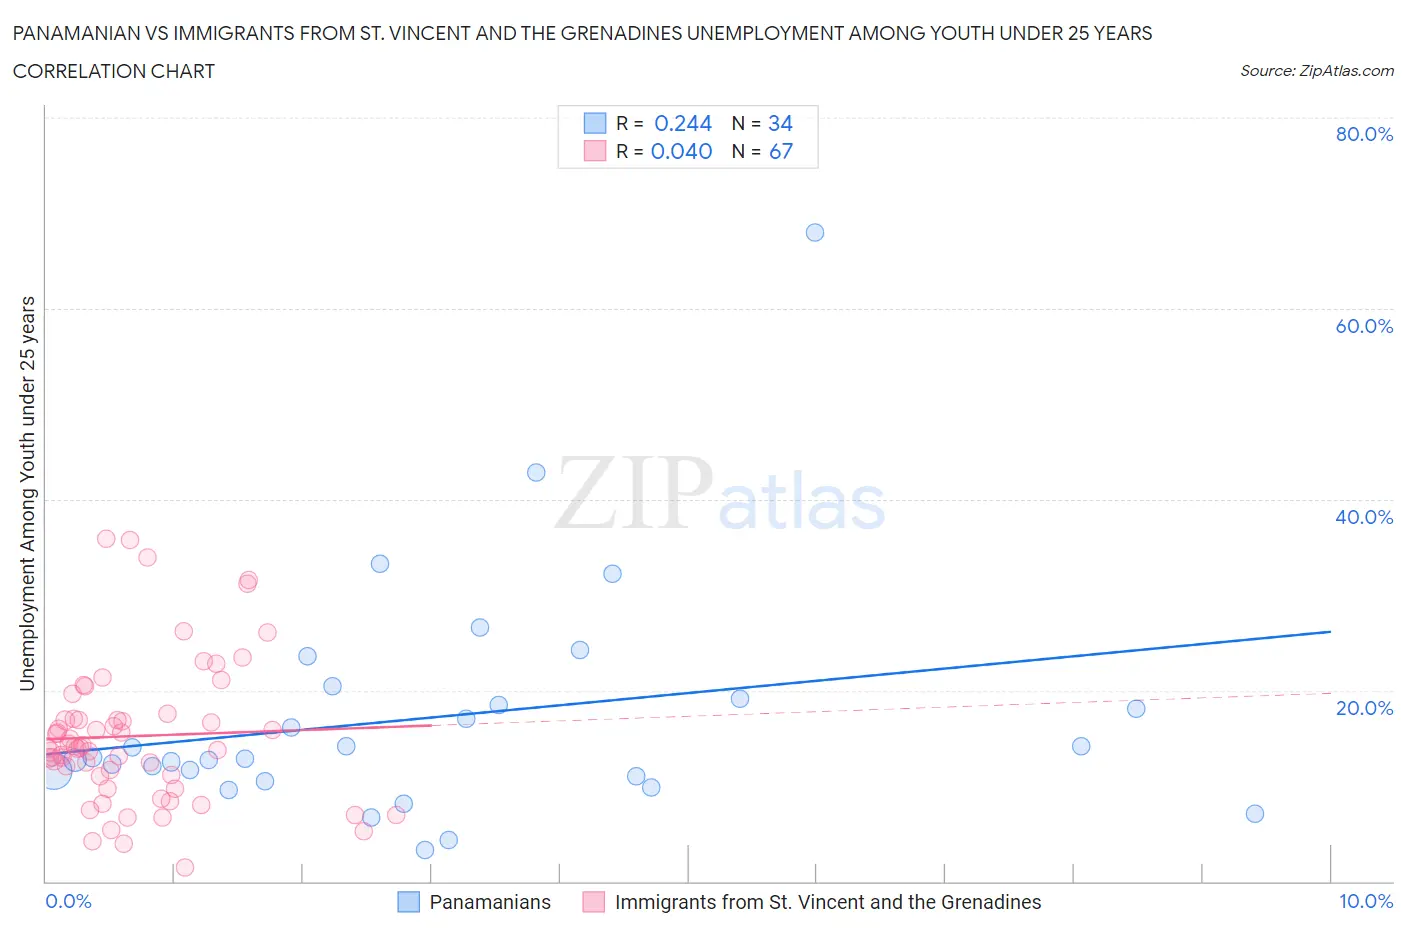 Panamanian vs Immigrants from St. Vincent and the Grenadines Unemployment Among Youth under 25 years